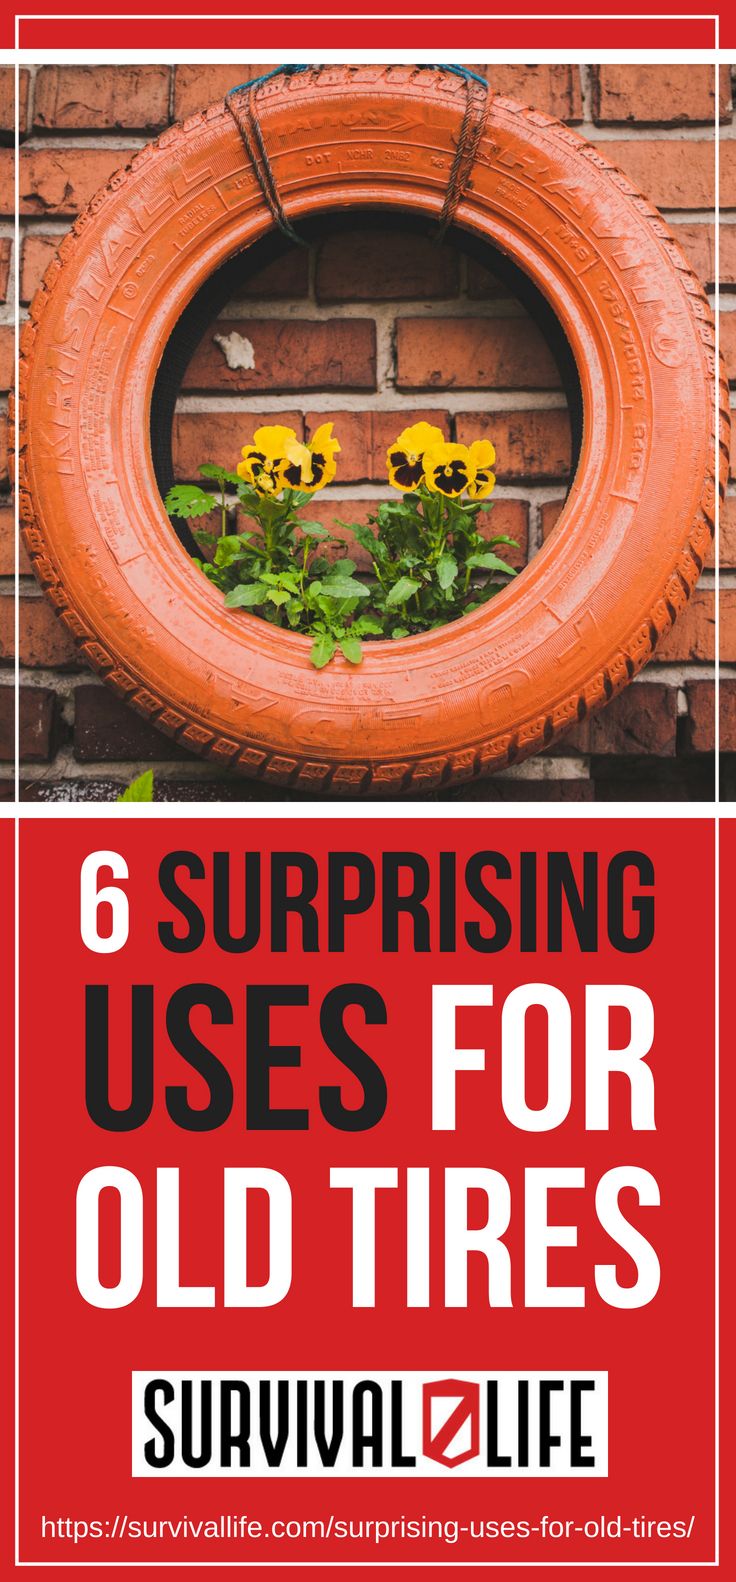 Surprising Uses For Old Tires | https://survivallife.com/surprising-uses-for-old-tires/